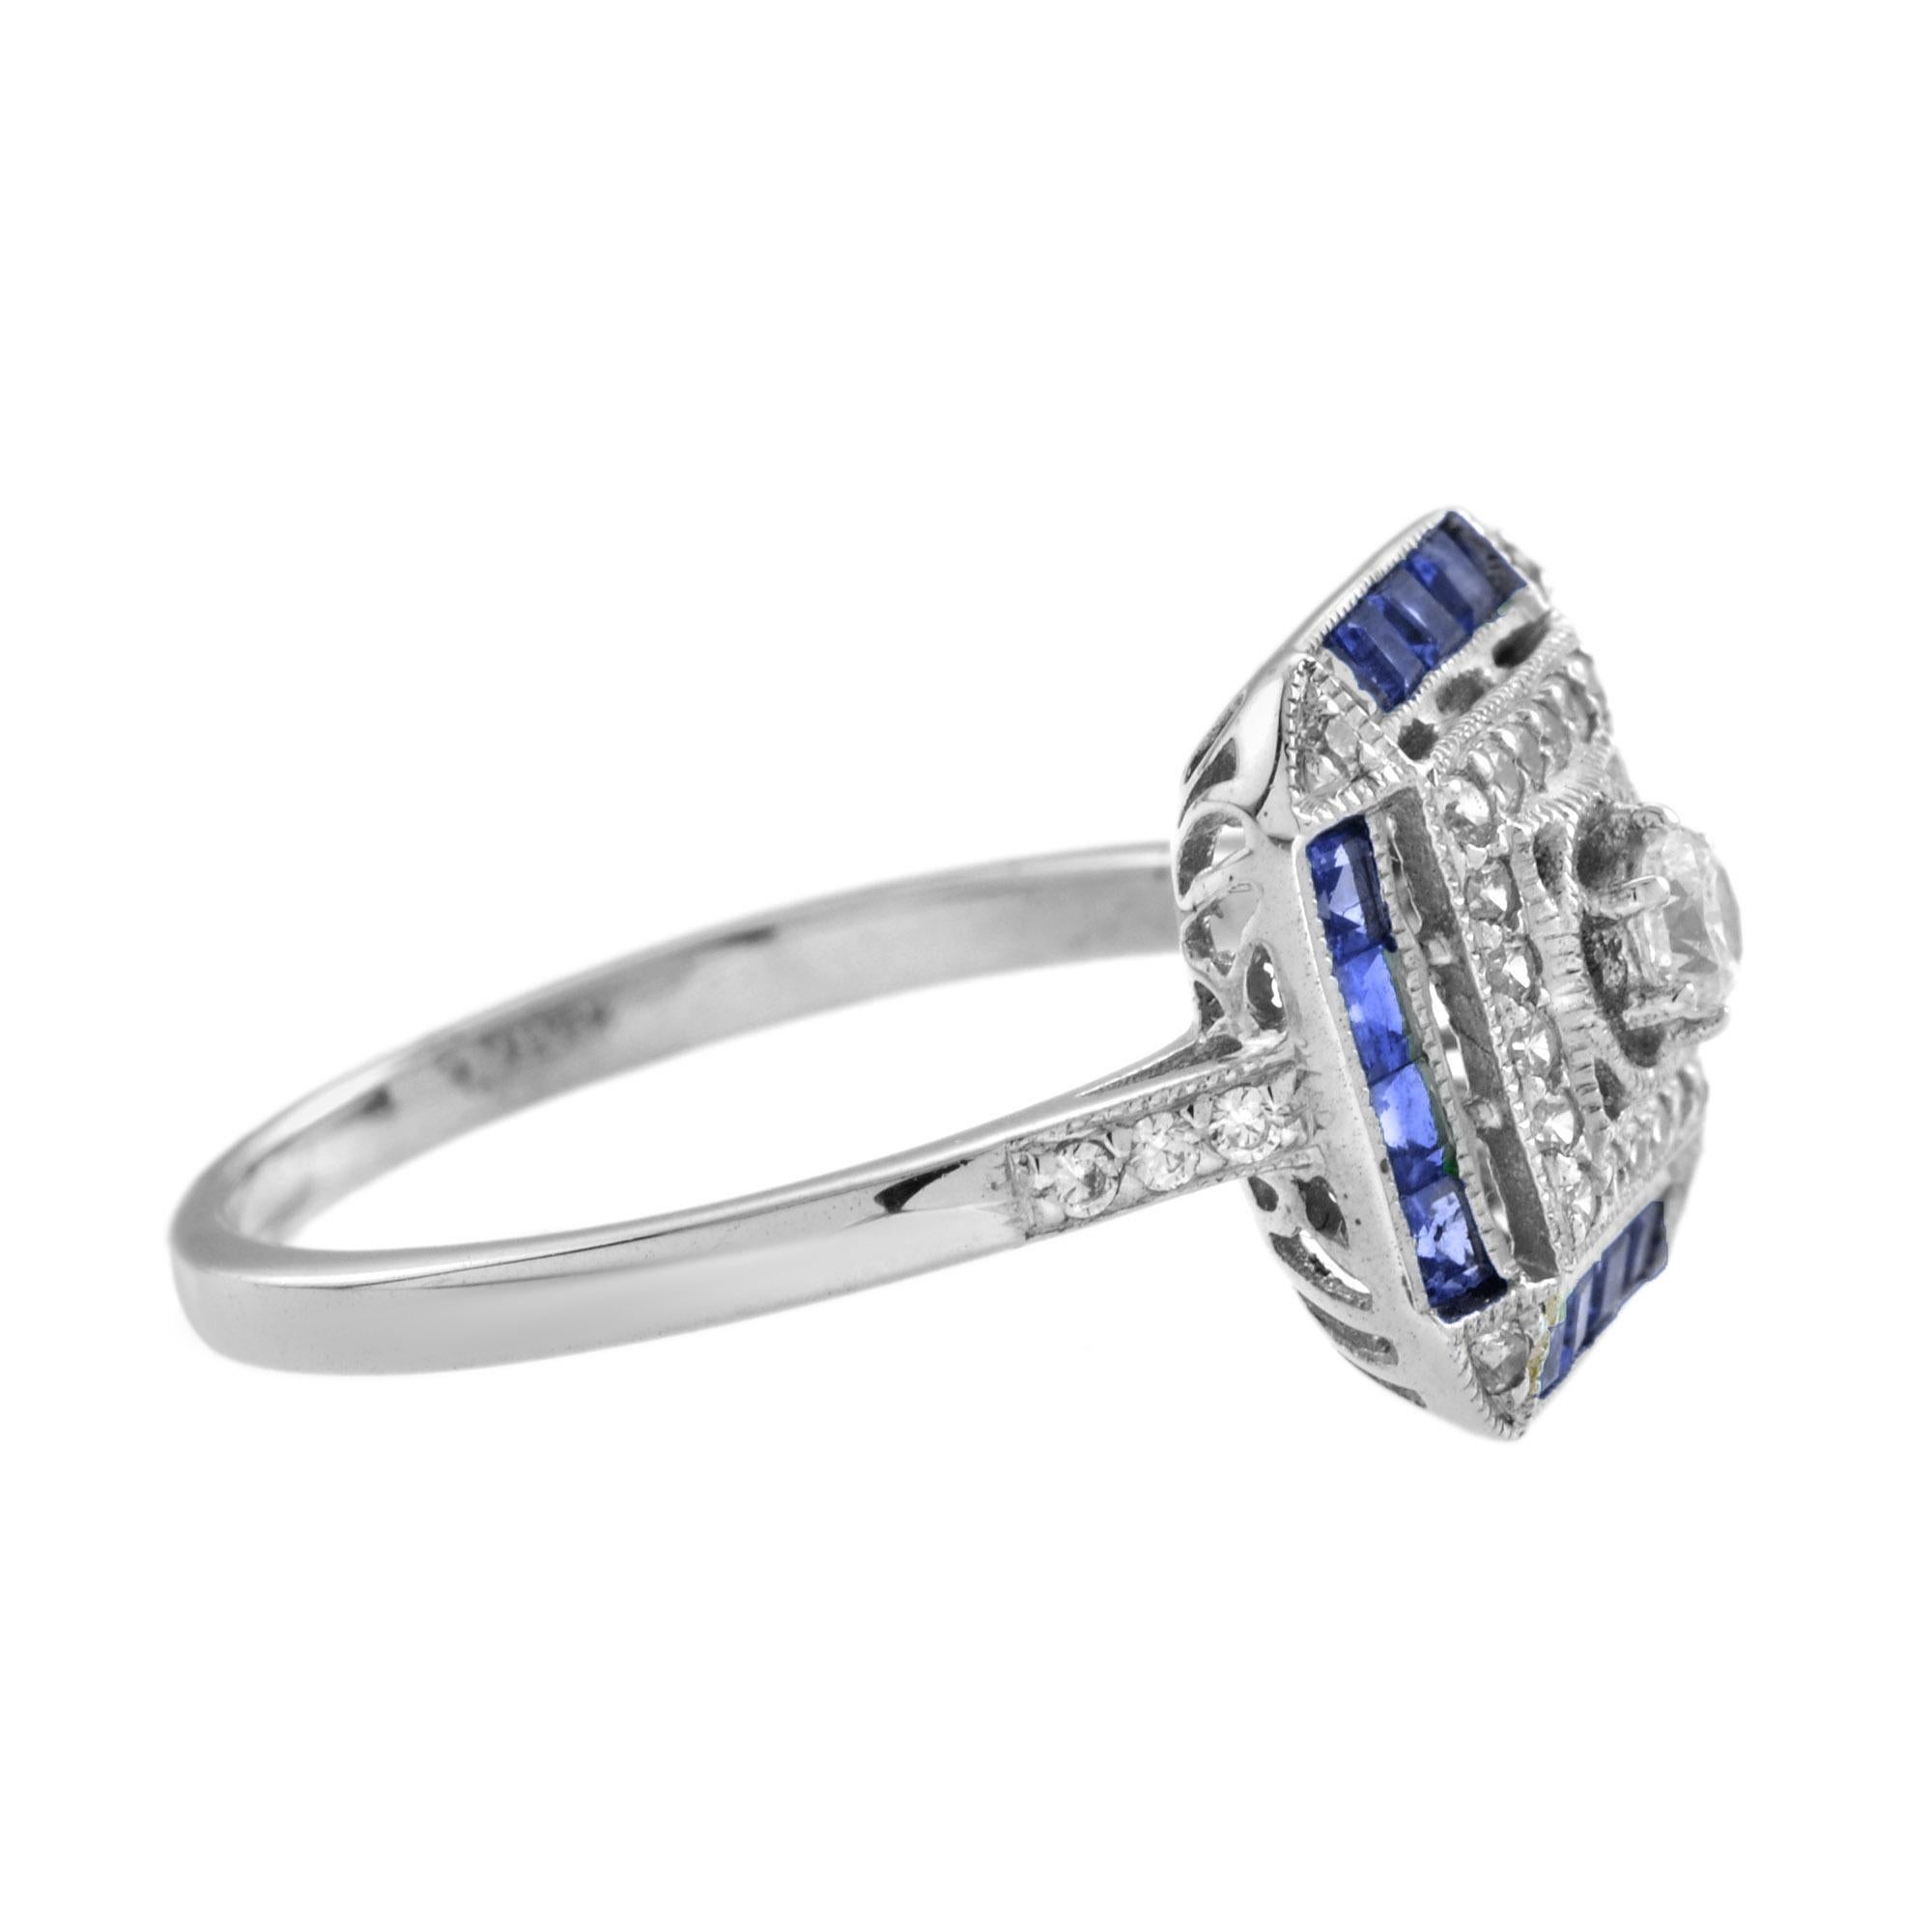 For Sale:  Diamond and Sapphire Art Deco Style Engagement Ring in 14K White Gold 3